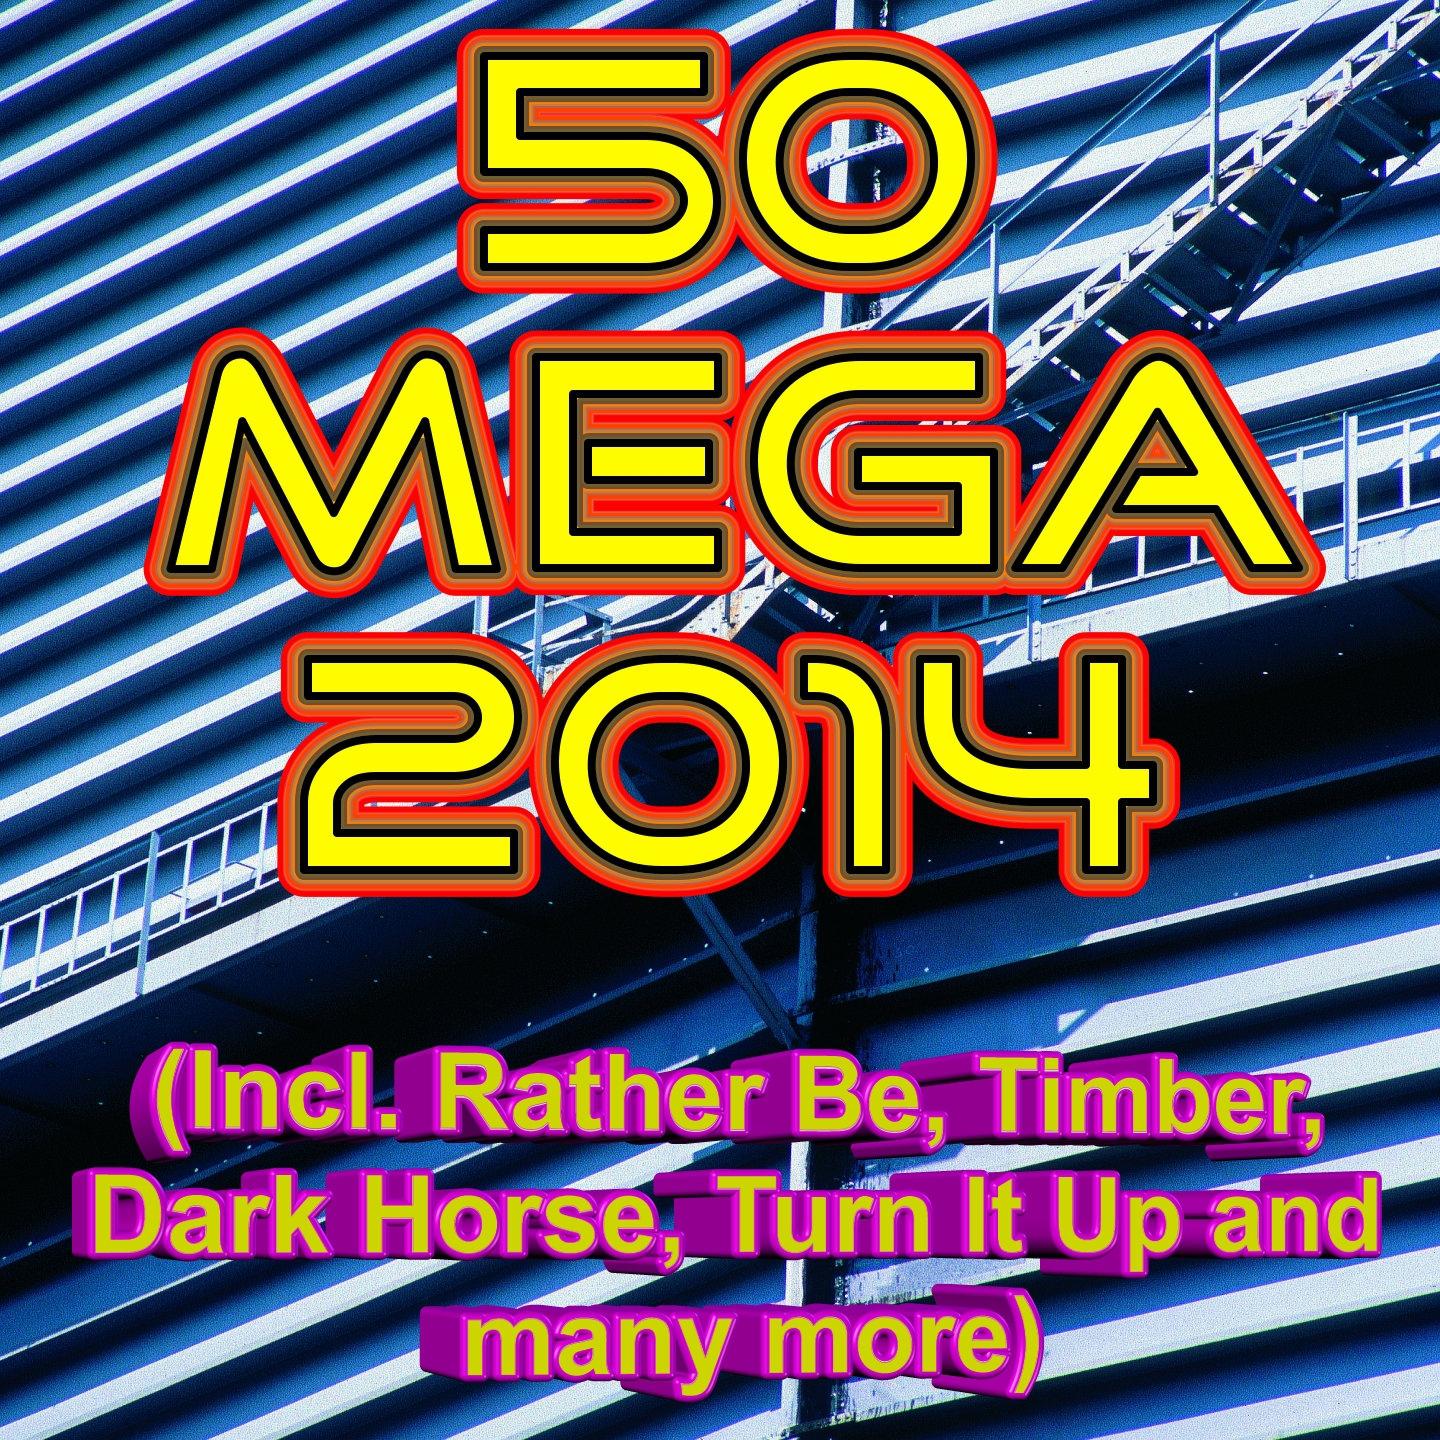 Постер альбома 50 Mega 2014 (Incl. Rather Be, Timber, Dark Horse, Turn It Up and many more)